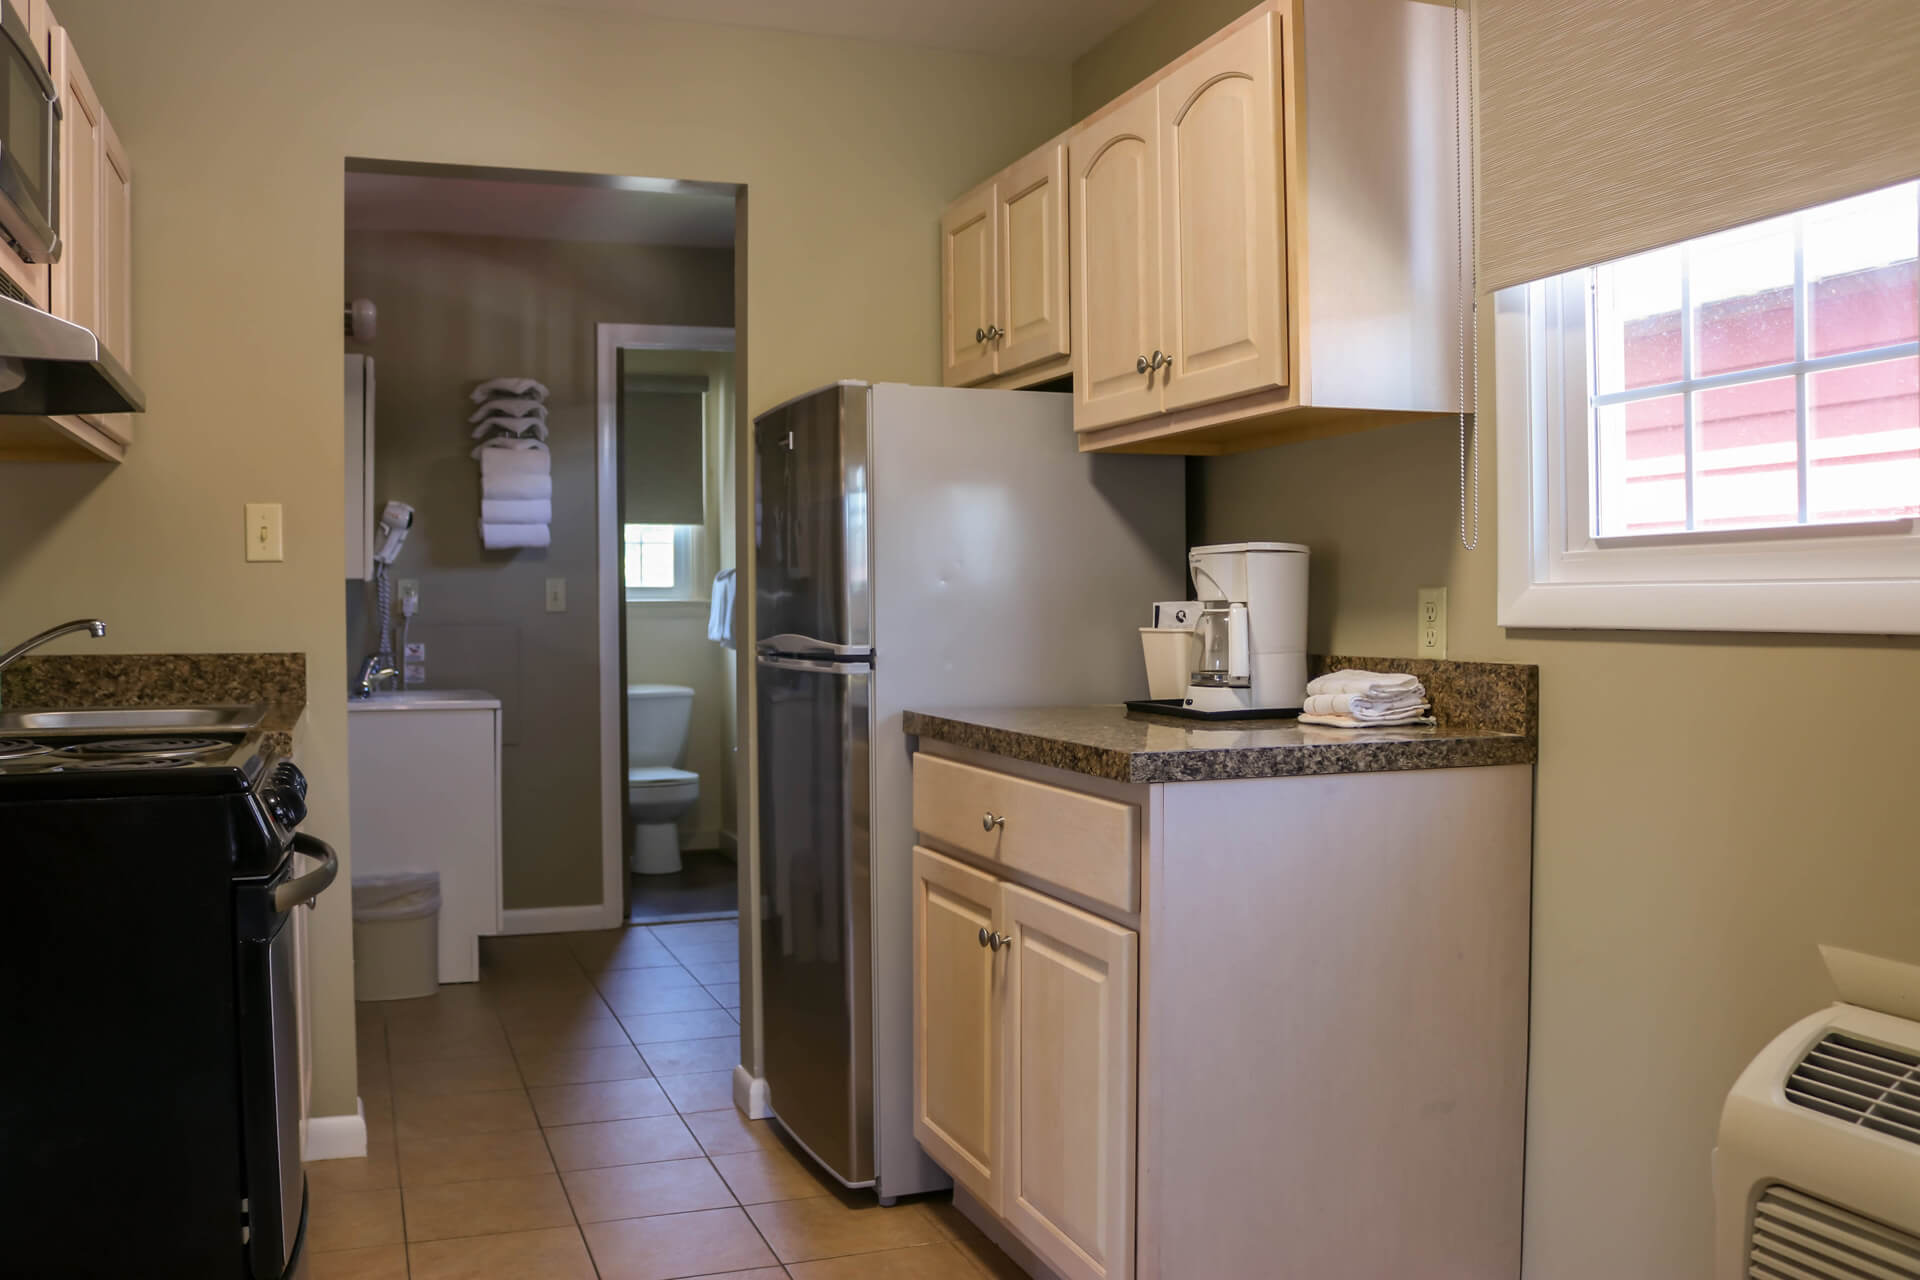 Vacation Homes 600-613 room with small kitchen